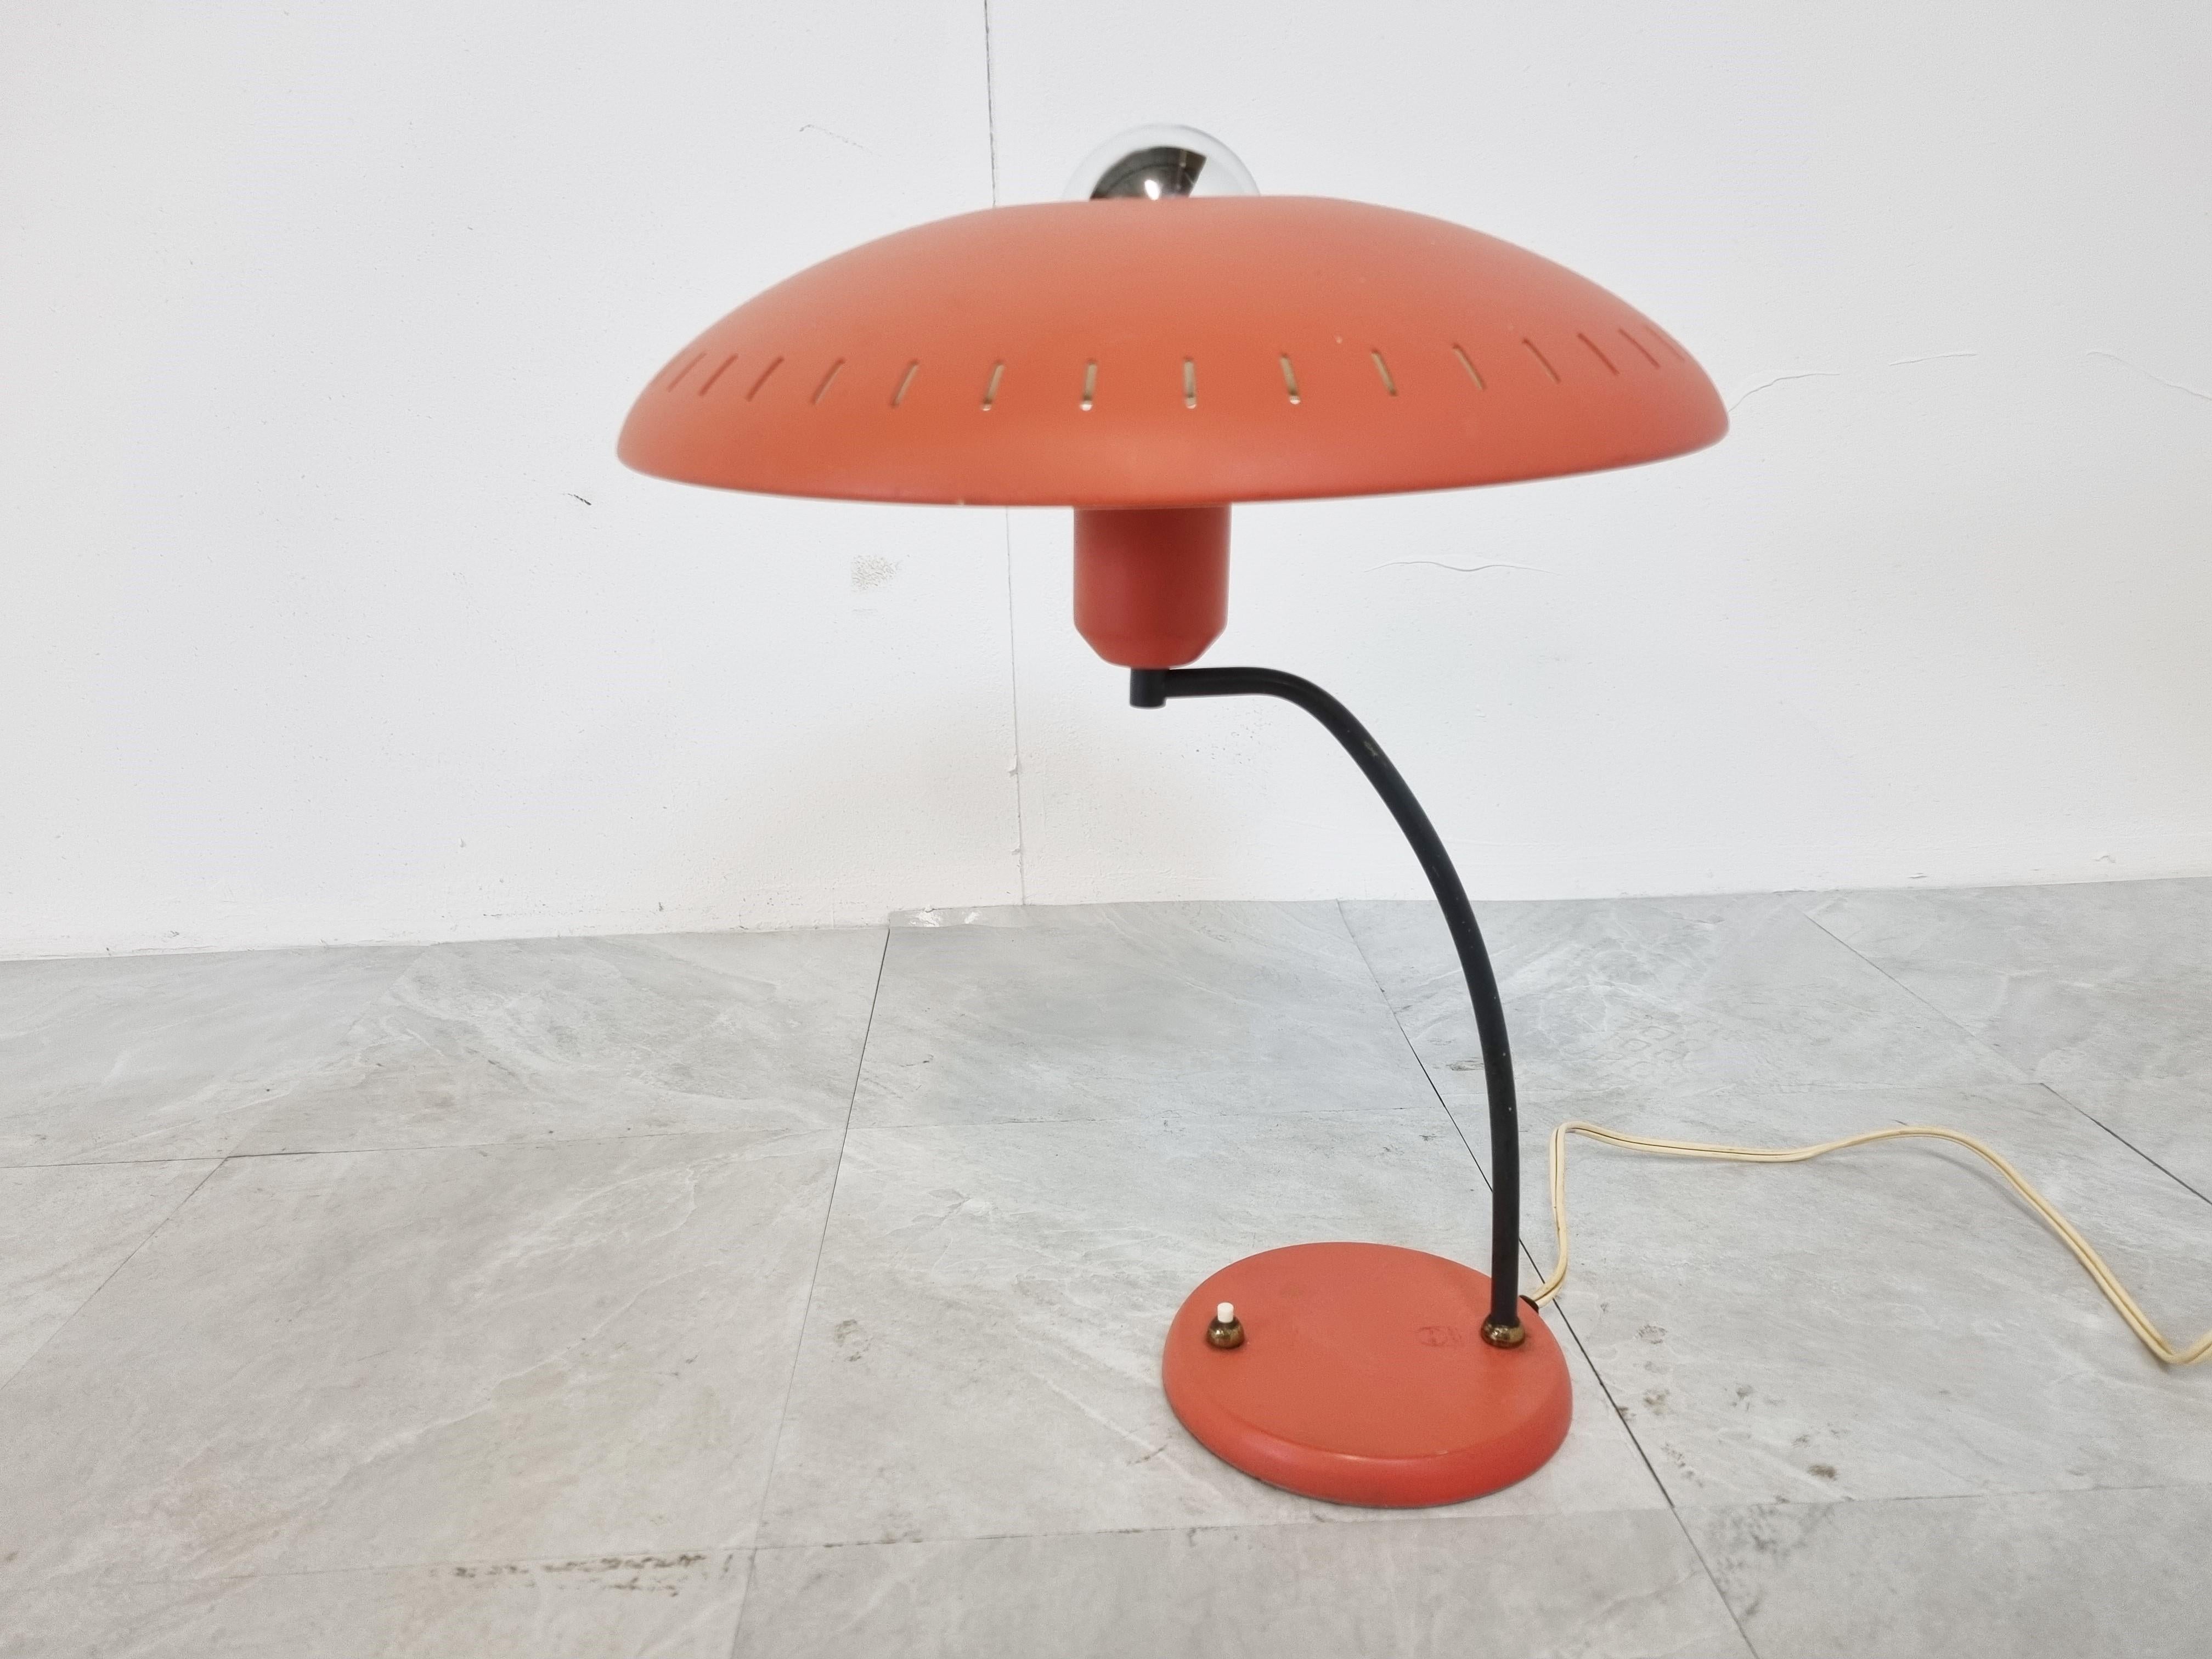 Space age 'Junior' desk lamp designed by Louis Kalff for Philips in the 1960s.

Ufo style shade with a black metal rod.

1960s - Netherlands

Good condition

Tested and ready to use with a regular E27 light bulb

Measures: height: 42 cm